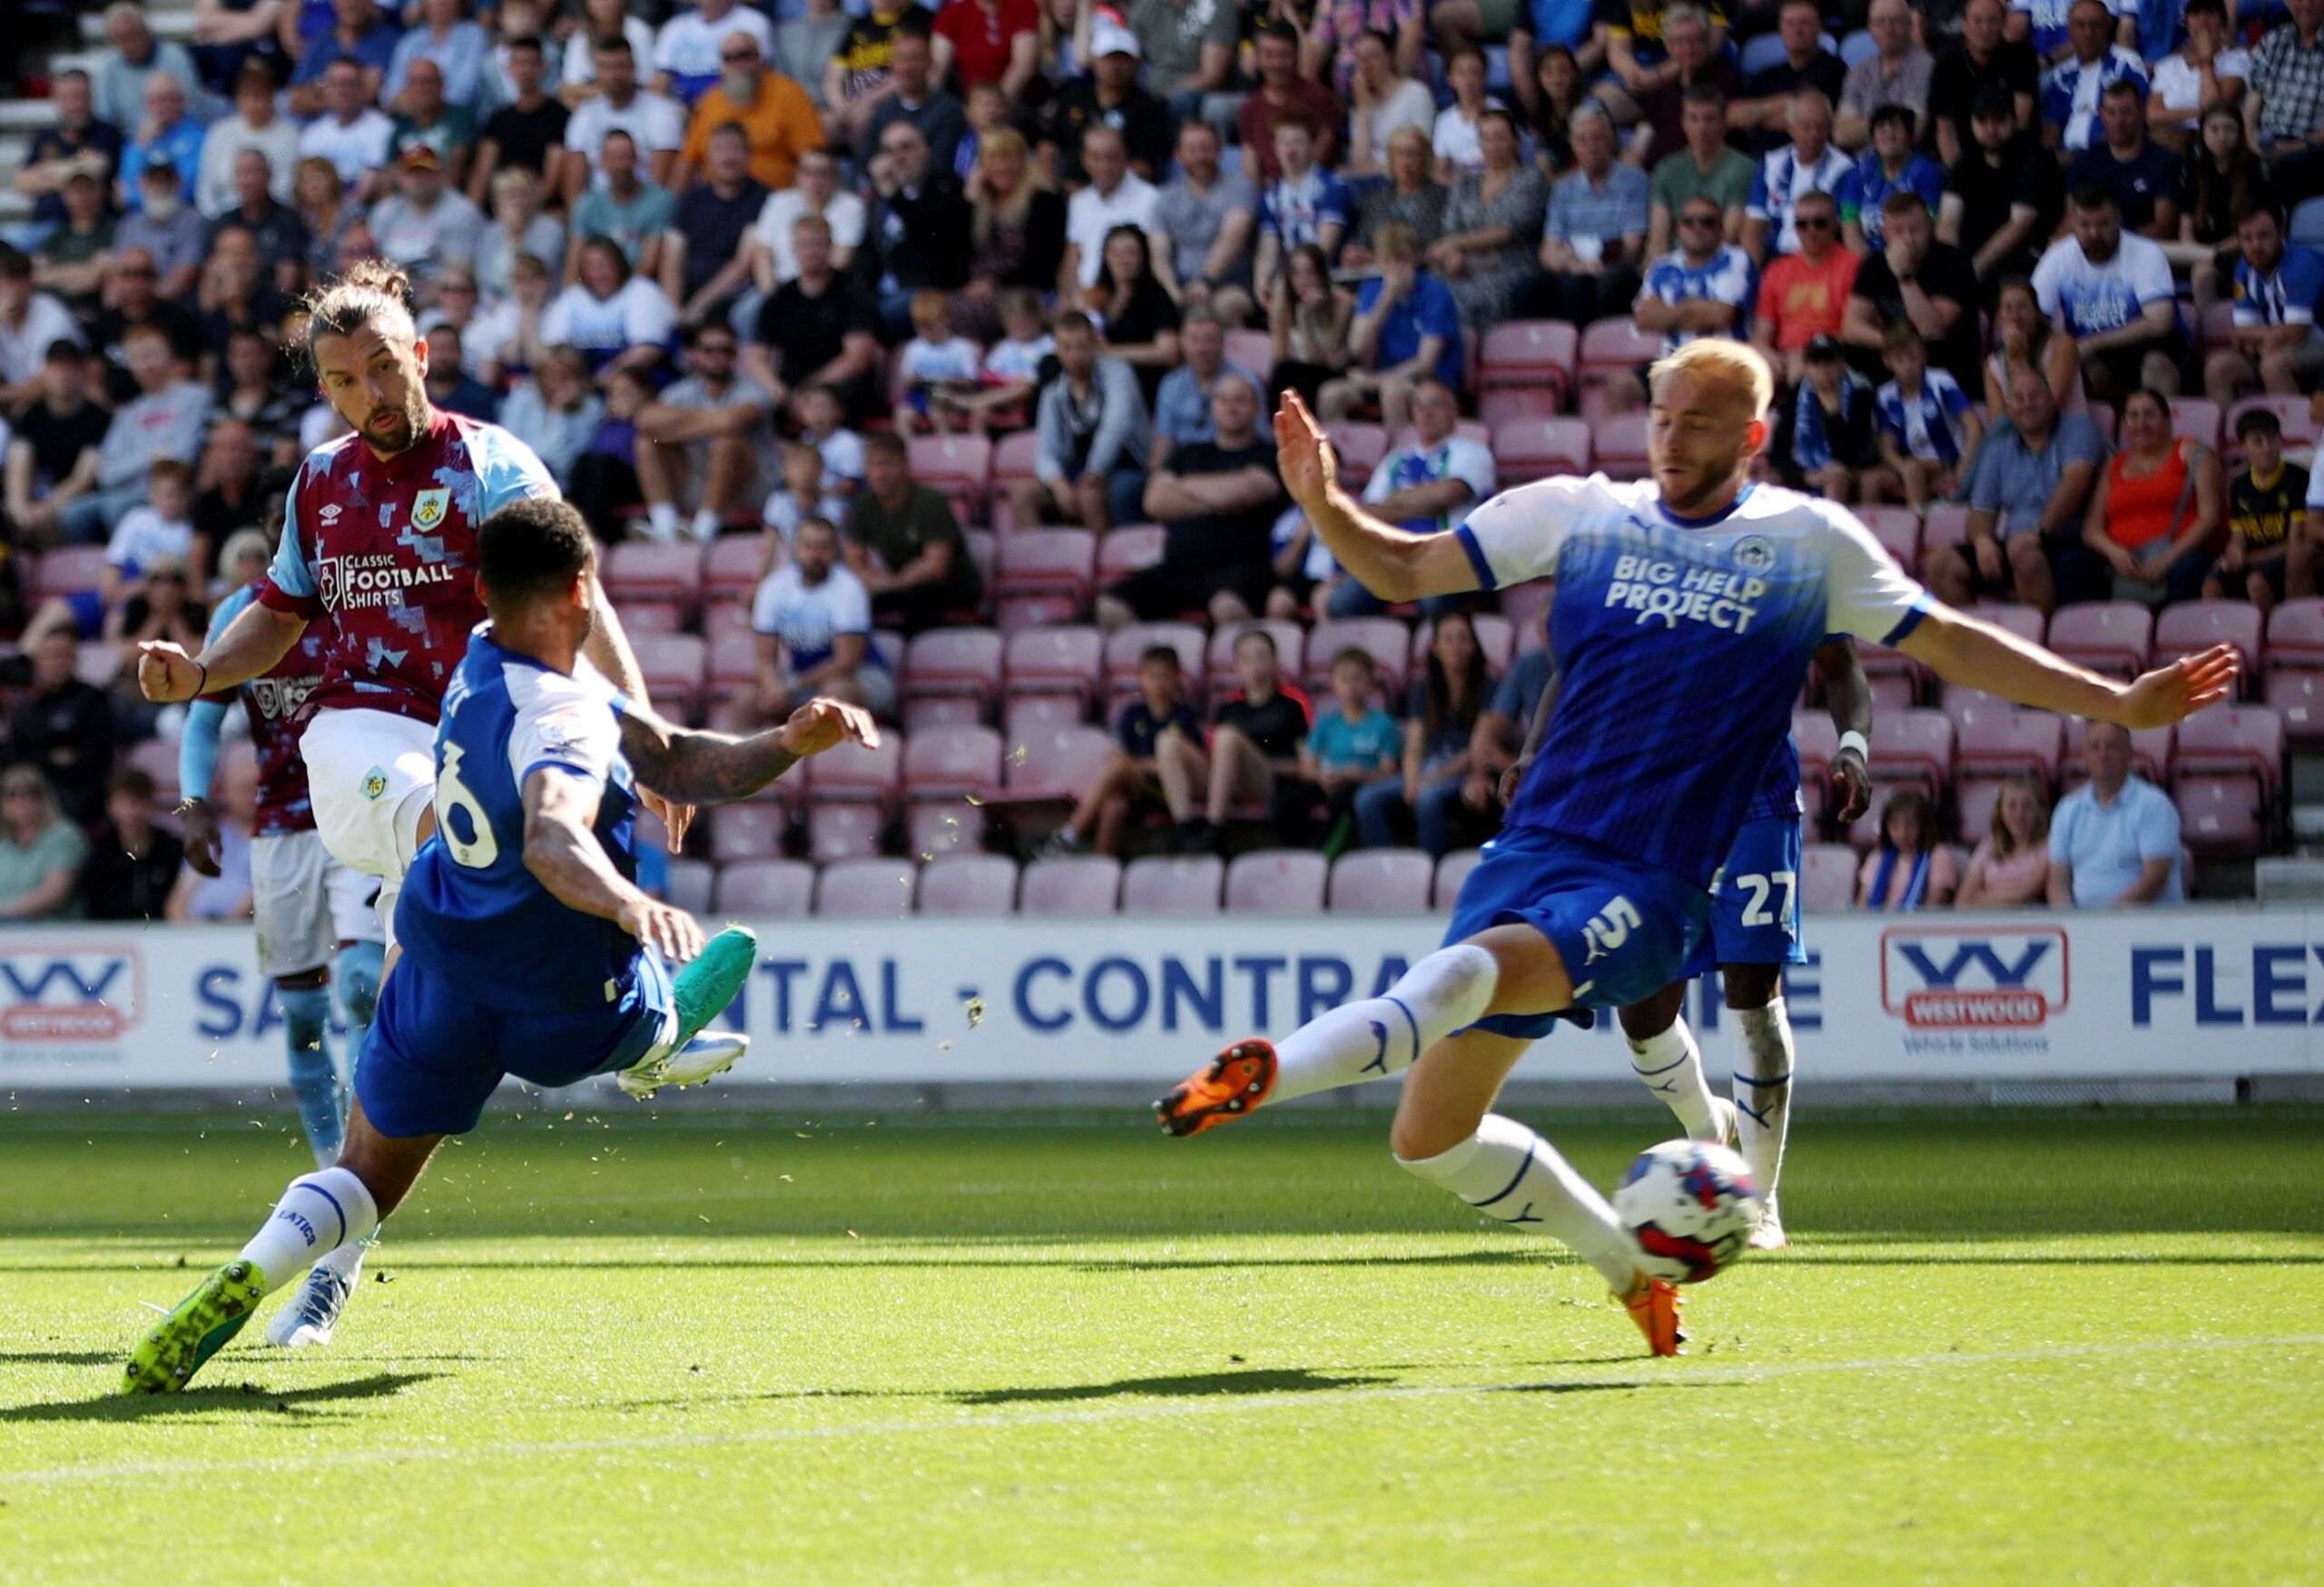 Soccer Football - Championship - Wigan Athletic v Burnley - DW Stadium, Wigan, Britain - August 27, 2022 Burnley's Jay Rodriguez scores their first goal  Action Images/Molly Darlington  EDITORIAL USE ONLY. No use with unauthorized audio, video, data, fixture lists, club/league logos or 